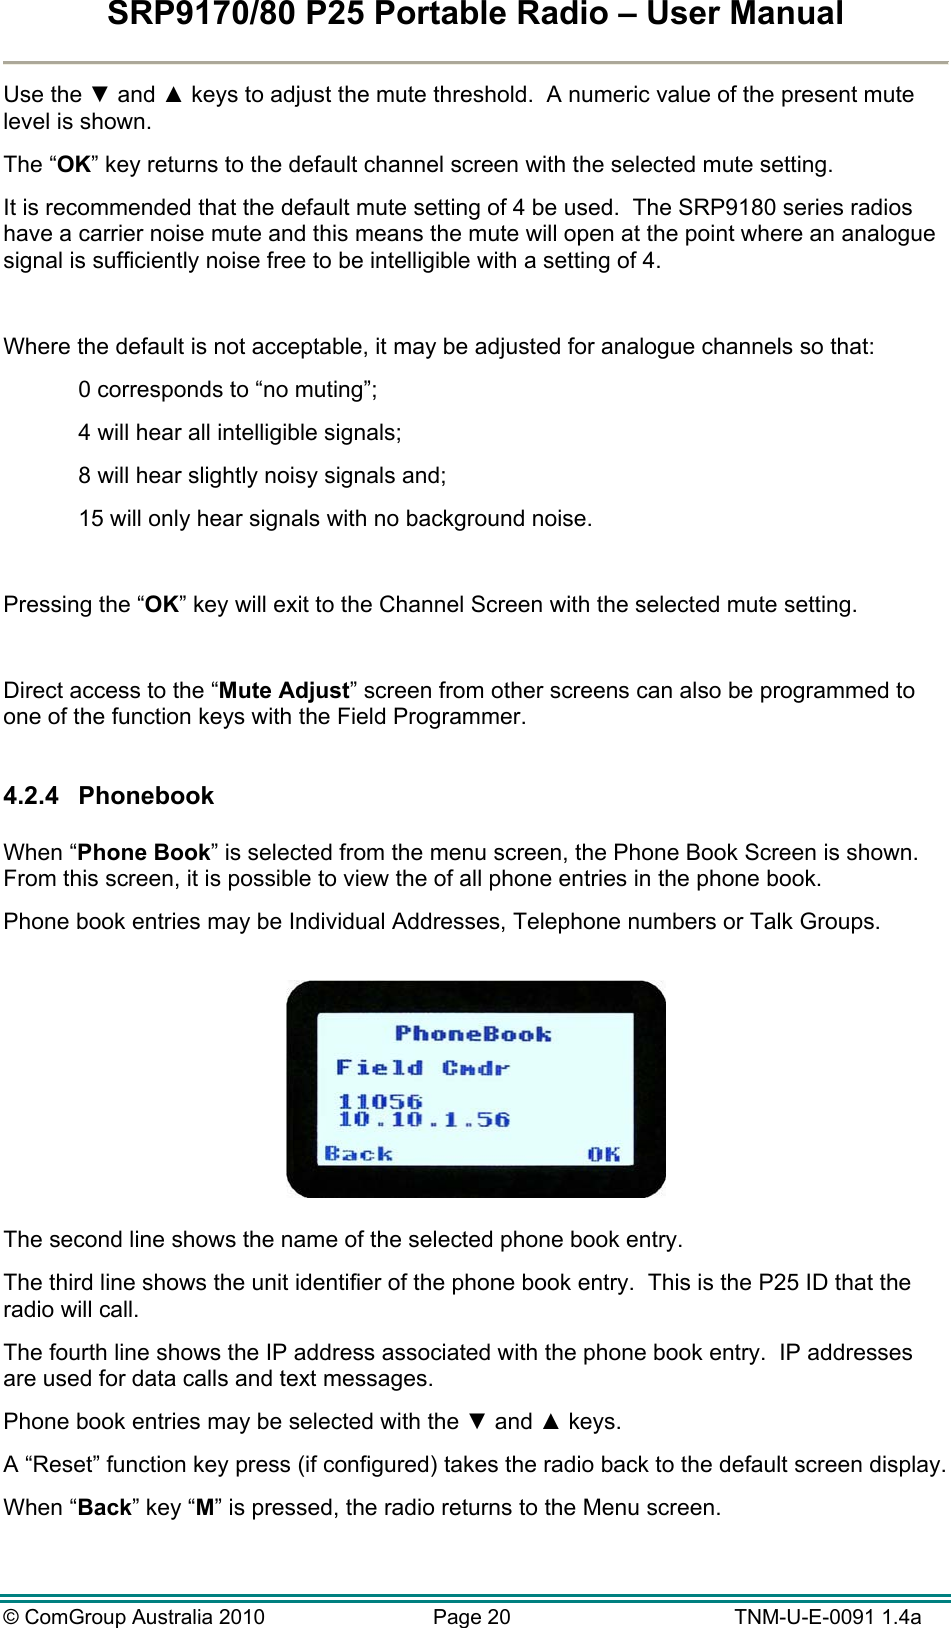 SRP9170/80 P25 Portable Radio – User Manual  © ComGroup Australia 2010  Page 20   TNM-U-E-0091 1.4a Use the ▼ and ▲ keys to adjust the mute threshold.  A numeric value of the present mute level is shown. The “OK” key returns to the default channel screen with the selected mute setting. It is recommended that the default mute setting of 4 be used.  The SRP9180 series radios have a carrier noise mute and this means the mute will open at the point where an analogue signal is sufficiently noise free to be intelligible with a setting of 4.  Where the default is not acceptable, it may be adjusted for analogue channels so that: 0 corresponds to “no muting”; 4 will hear all intelligible signals; 8 will hear slightly noisy signals and; 15 will only hear signals with no background noise.  Pressing the “OK” key will exit to the Channel Screen with the selected mute setting.  Direct access to the “Mute Adjust” screen from other screens can also be programmed to one of the function keys with the Field Programmer.  4.2.4 Phonebook  When “Phone Book” is selected from the menu screen, the Phone Book Screen is shown.  From this screen, it is possible to view the of all phone entries in the phone book. Phone book entries may be Individual Addresses, Telephone numbers or Talk Groups.    The second line shows the name of the selected phone book entry.   The third line shows the unit identifier of the phone book entry.  This is the P25 ID that the radio will call. The fourth line shows the IP address associated with the phone book entry.  IP addresses are used for data calls and text messages. Phone book entries may be selected with the ▼ and ▲ keys. A “Reset” function key press (if configured) takes the radio back to the default screen display. When “Back” key “M” is pressed, the radio returns to the Menu screen.  